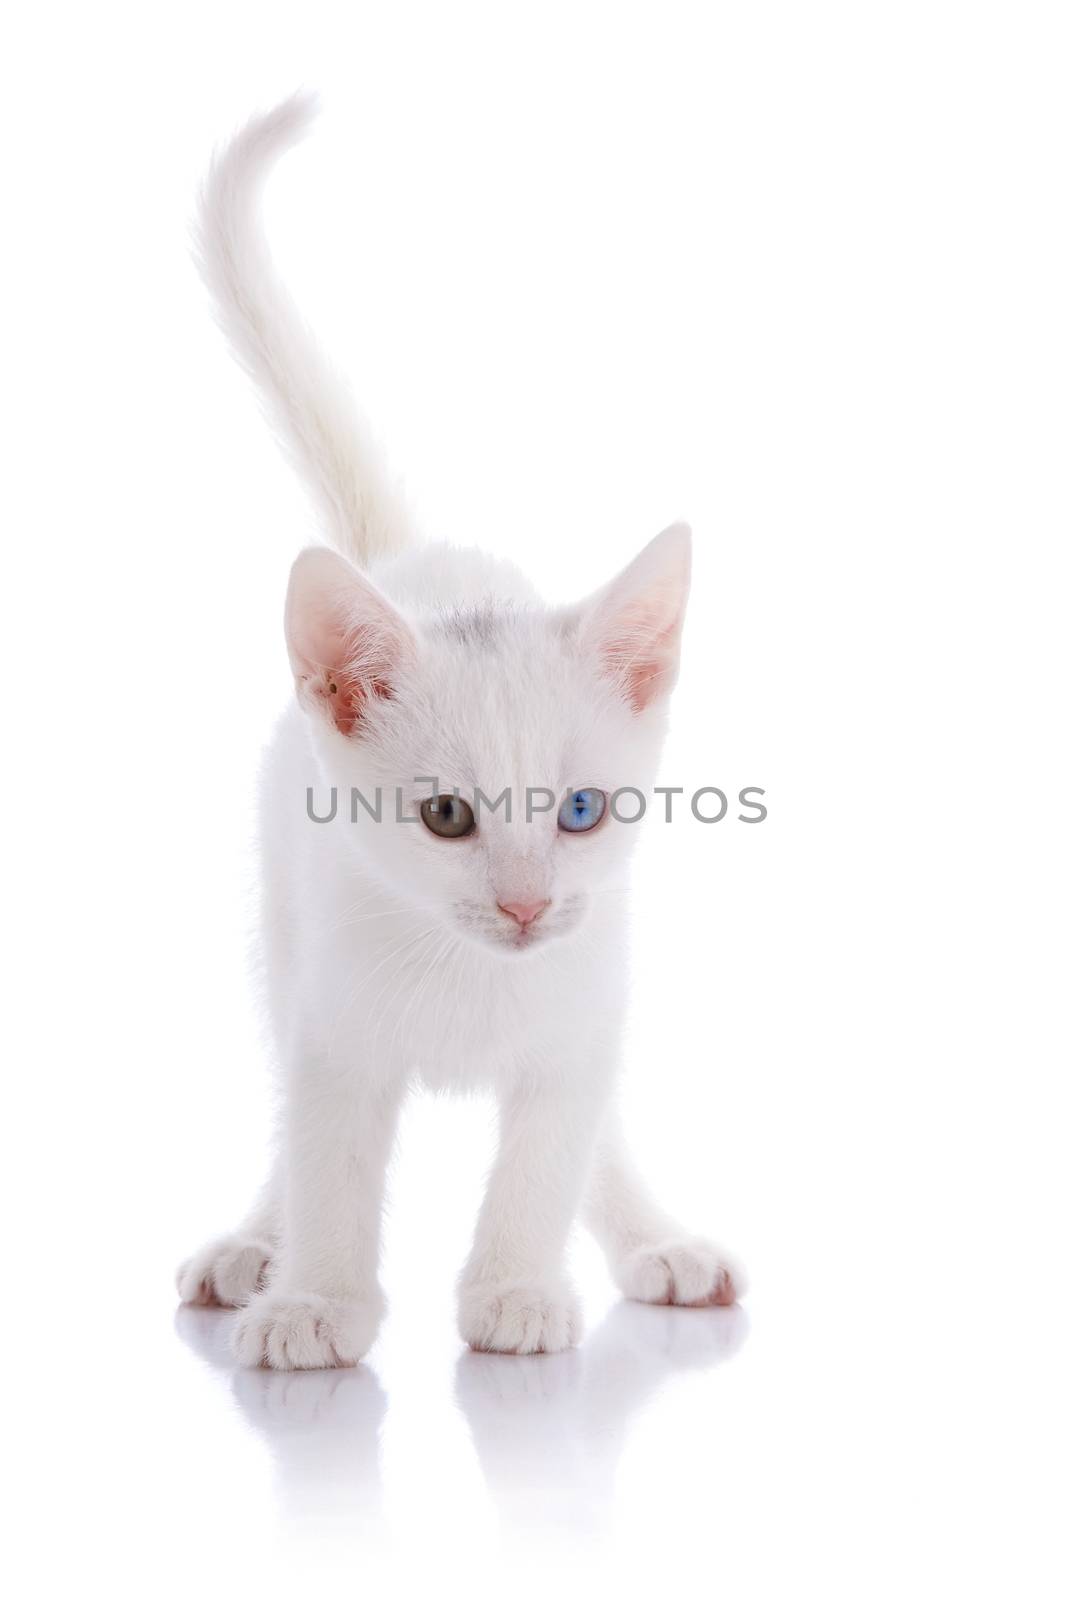 White kitten with multi-colored eyes. Kitten on a white background. Small predator. Small cat.